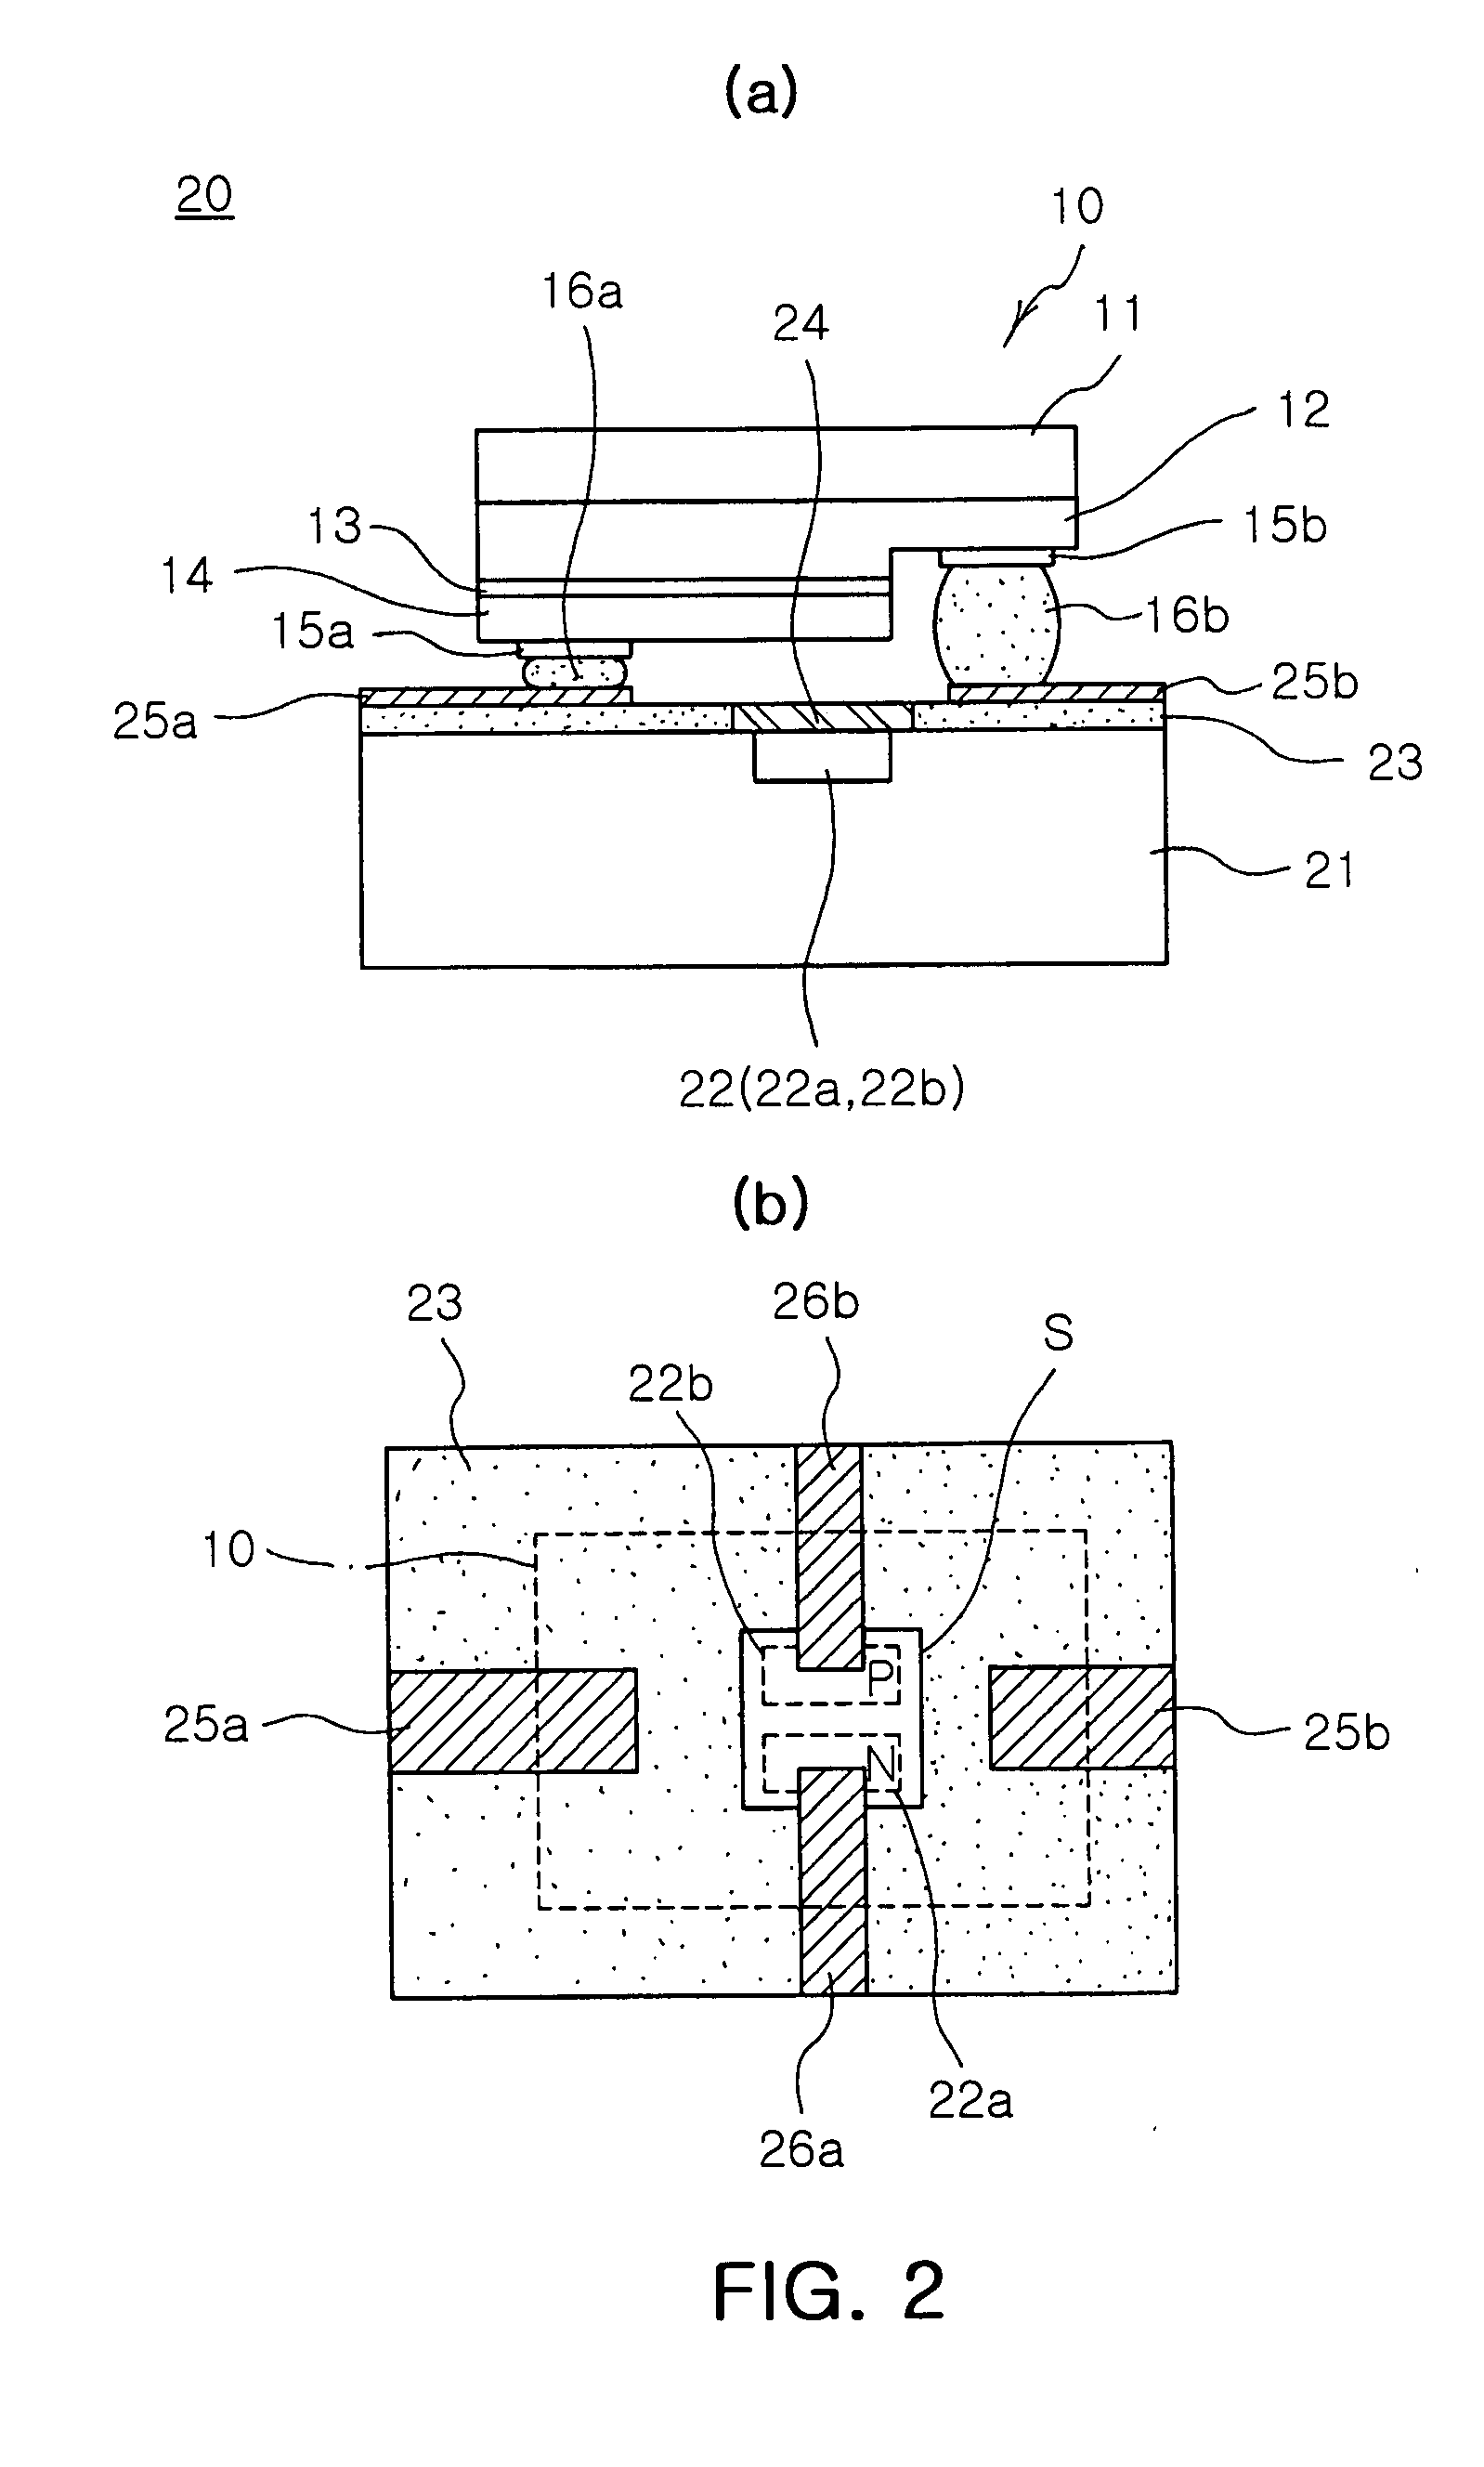 Light emitting diode package including monitoring photodiode